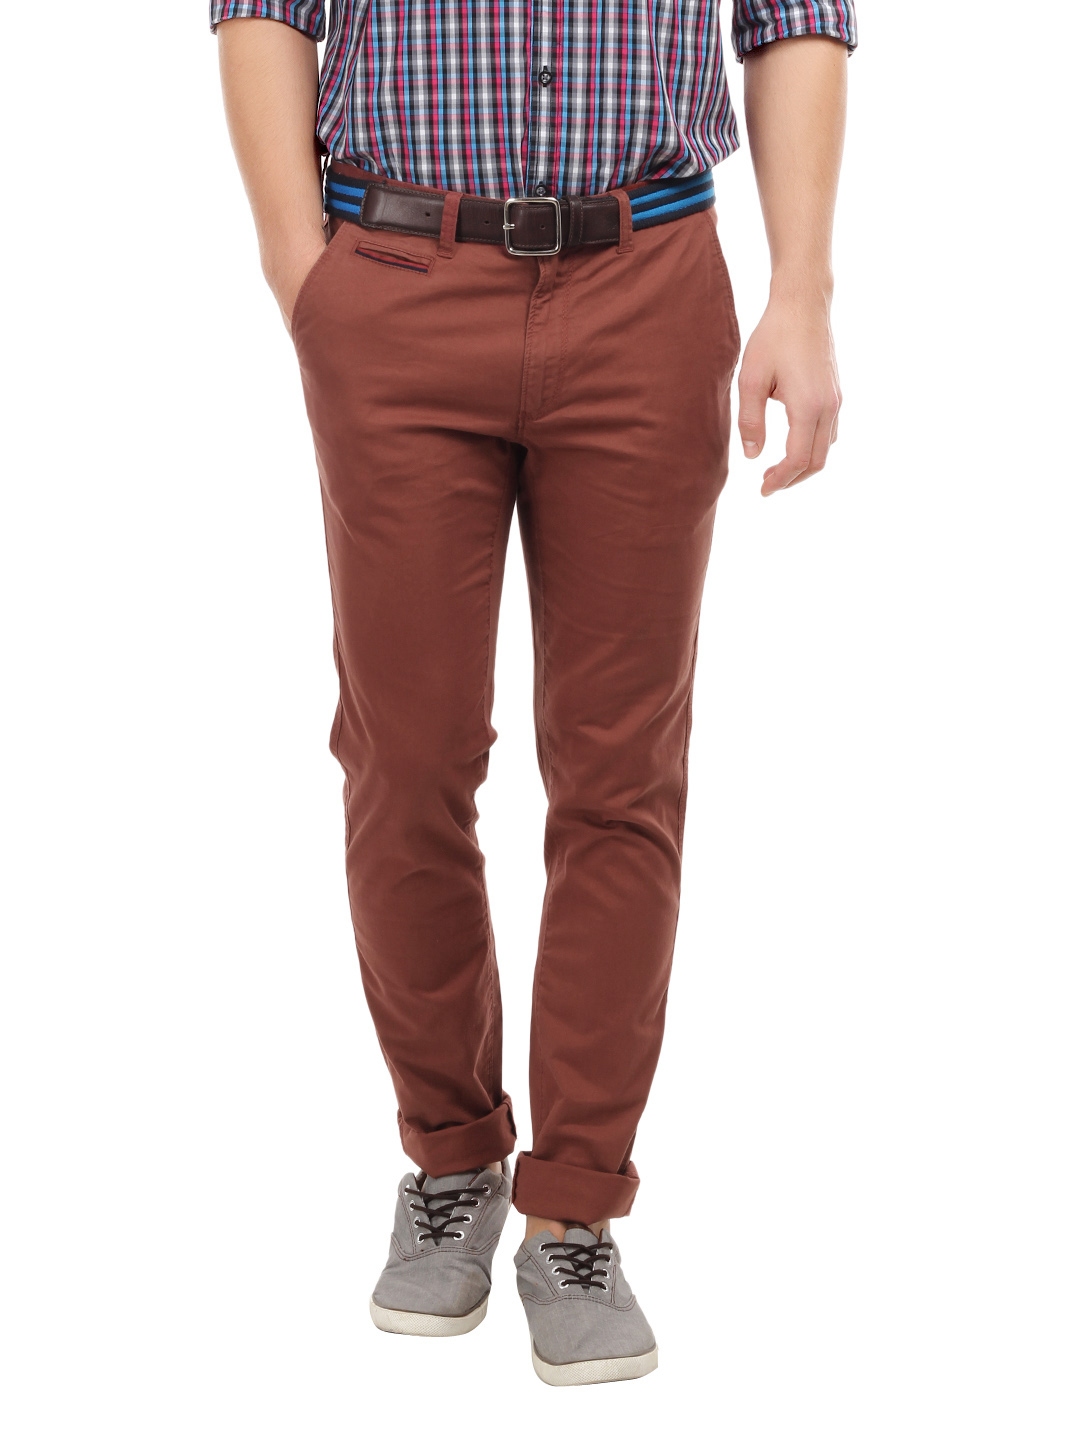 HenryandSmith Maroon Red Stretch Washed Men Chino Formal Pants  OSBazzar